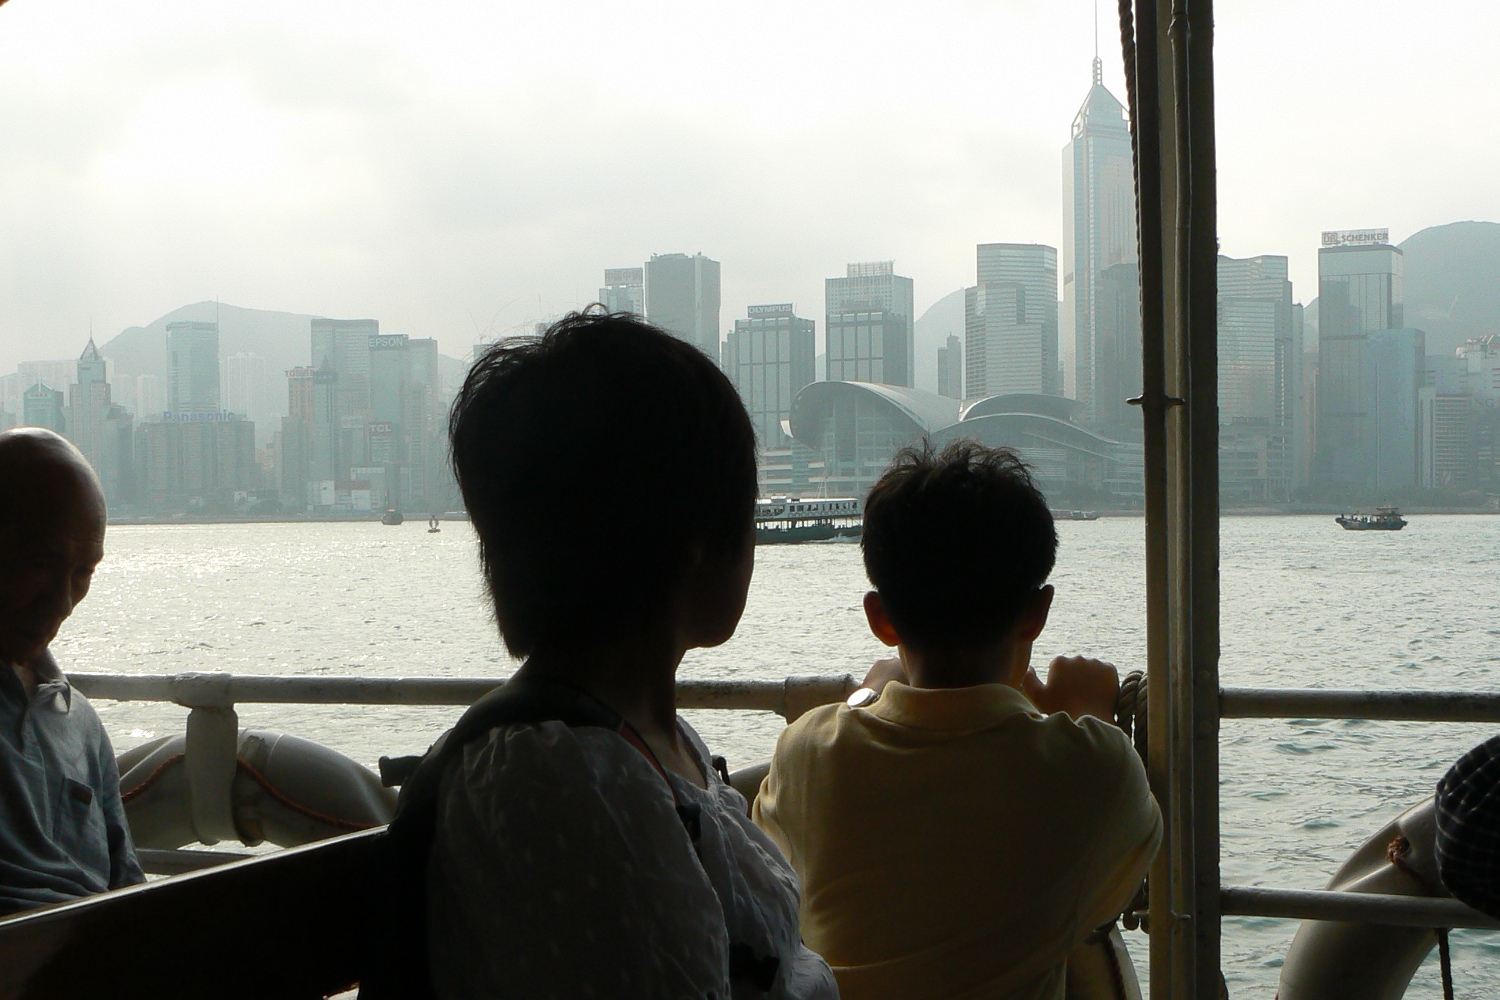 kA ride on the Star Ferry – a must for families visiting Hong Kong. Image by Constantine Agustin / CC BY-SA 2.0